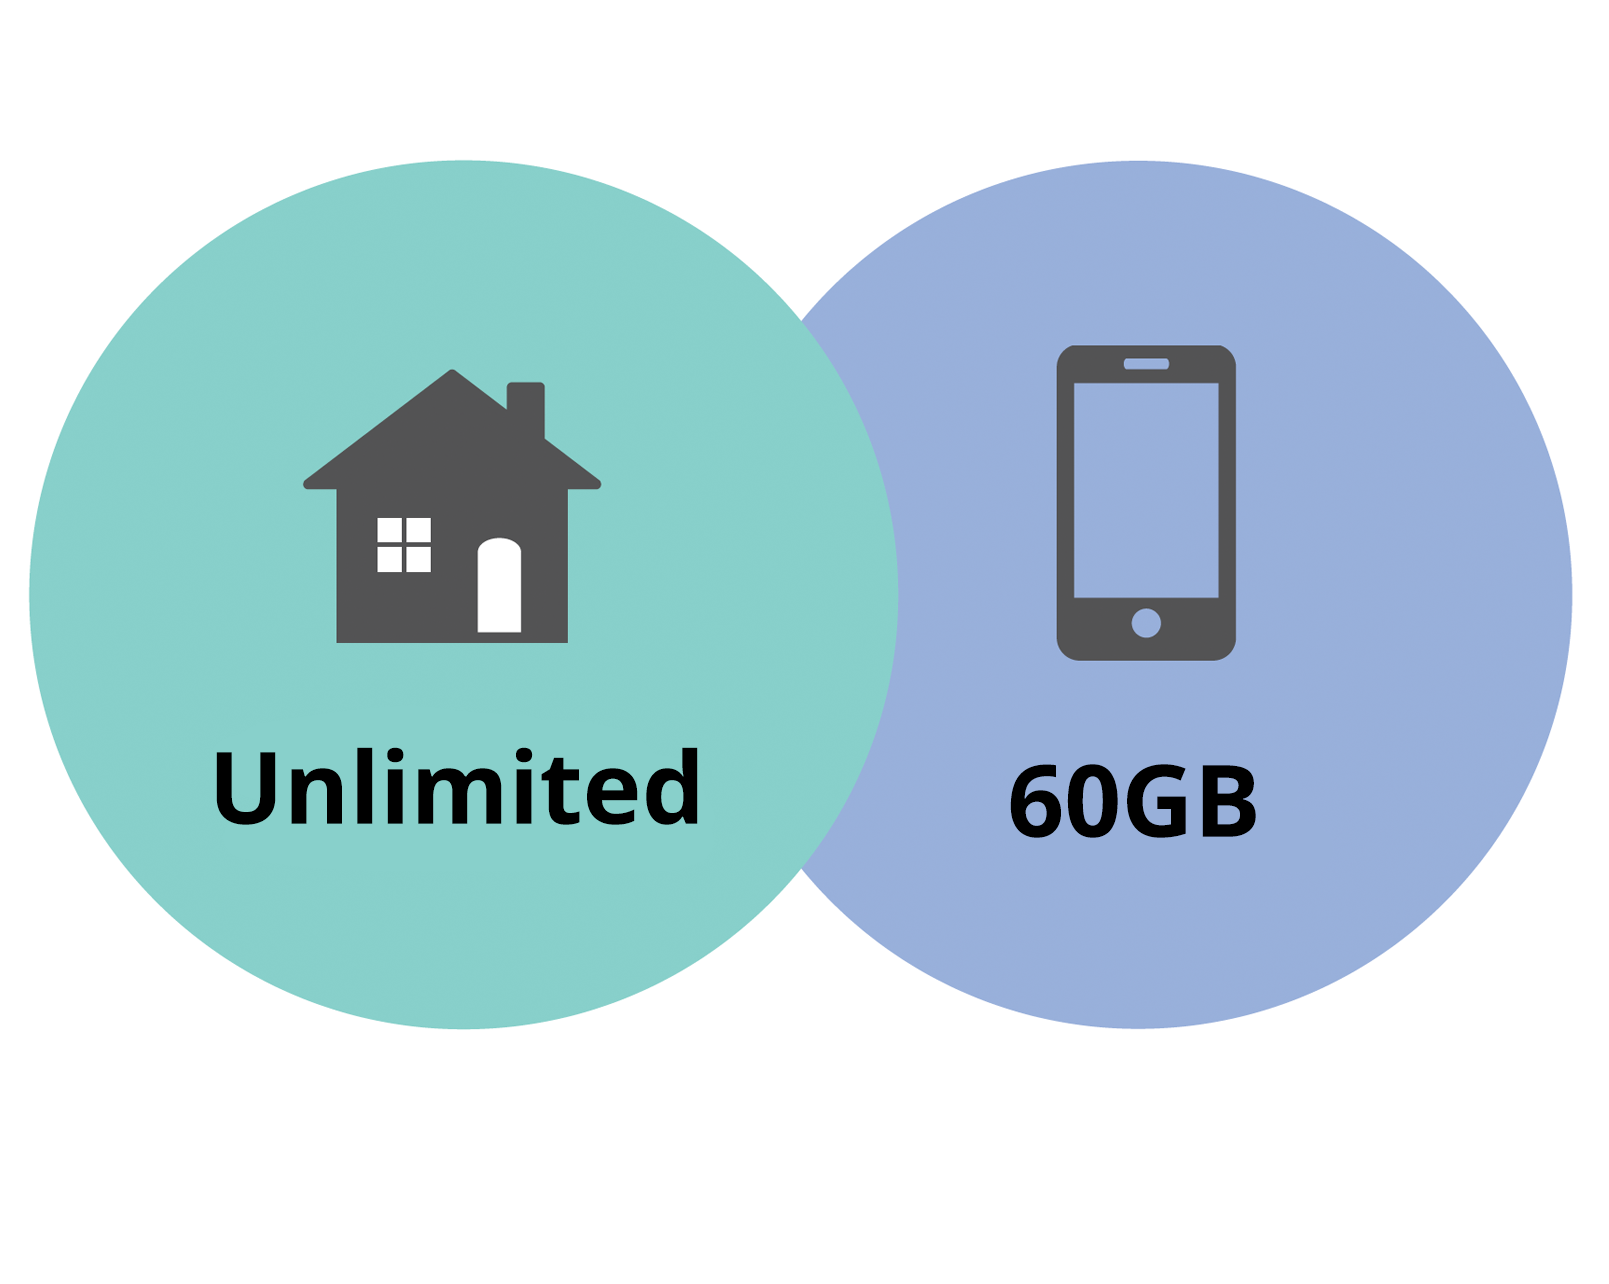 An illustration of different types of data plans.